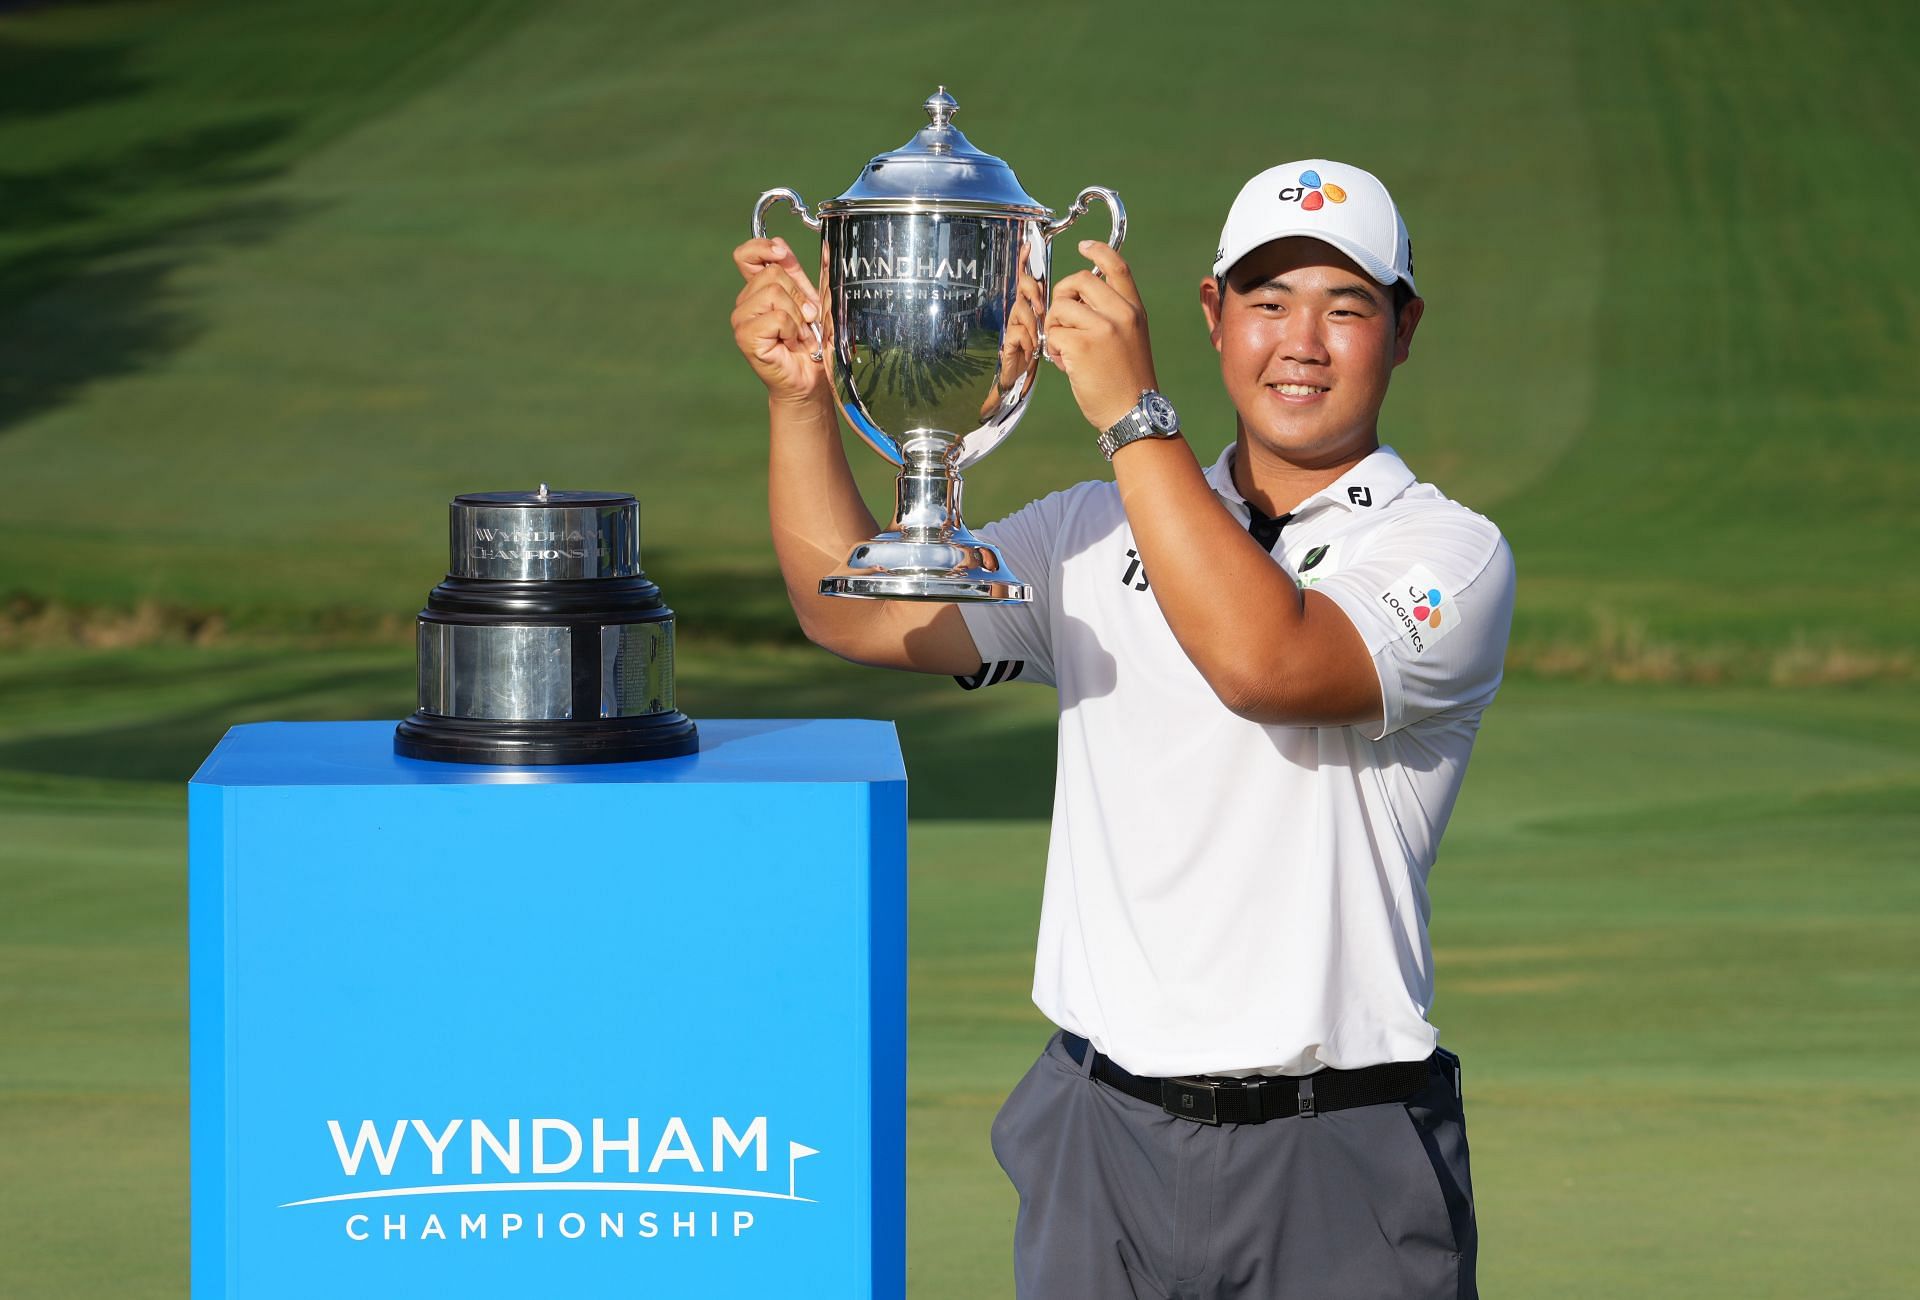 Kim poses with the Wyndham Championship trophy at Sedgefield Country Club in Greensboro, North Carolina.